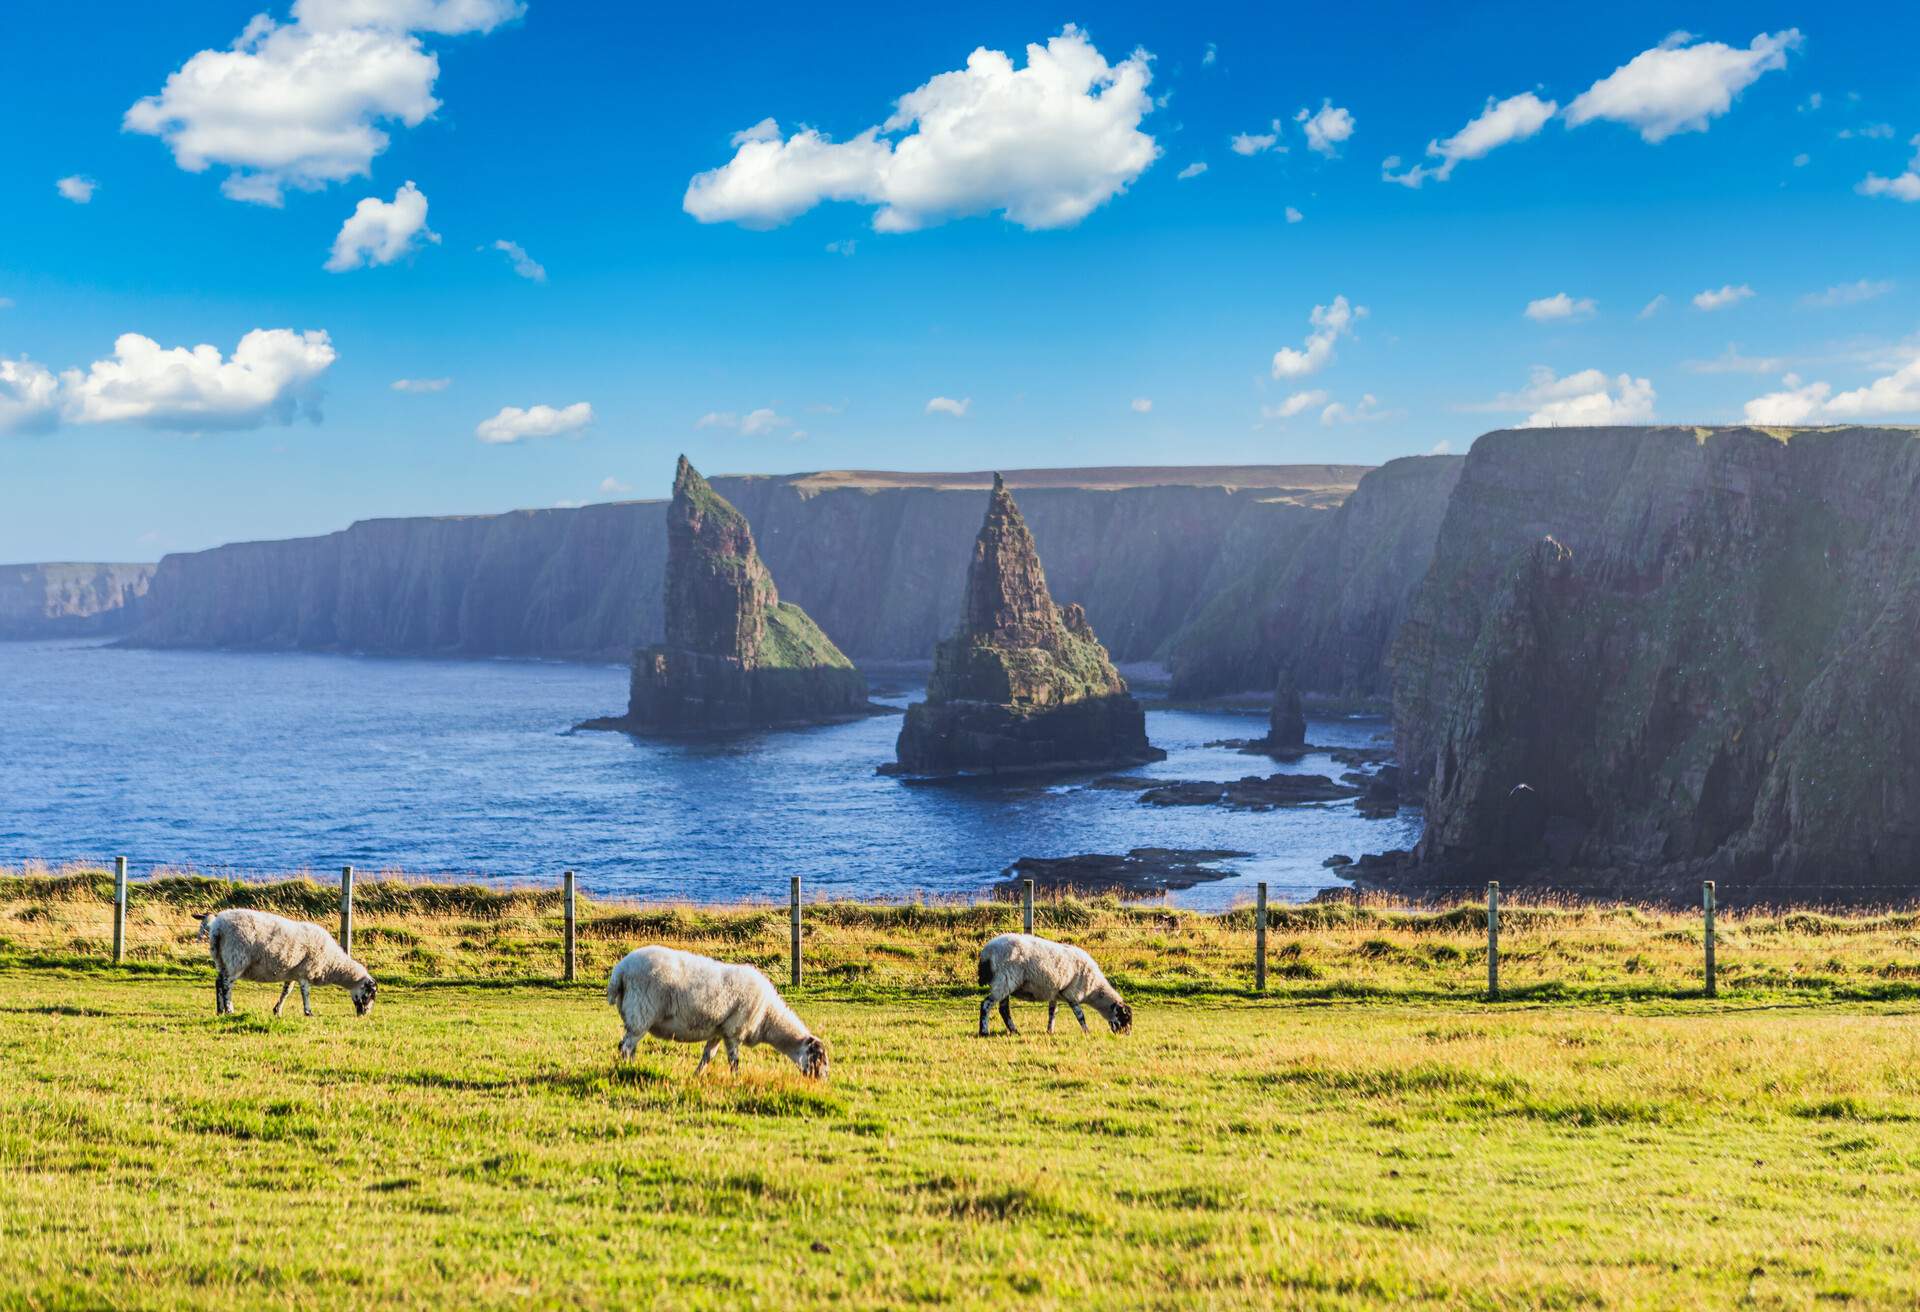 DEST_UK_SCOTLAND_Stacks-of-Duncansby_GettyImages-1355717516